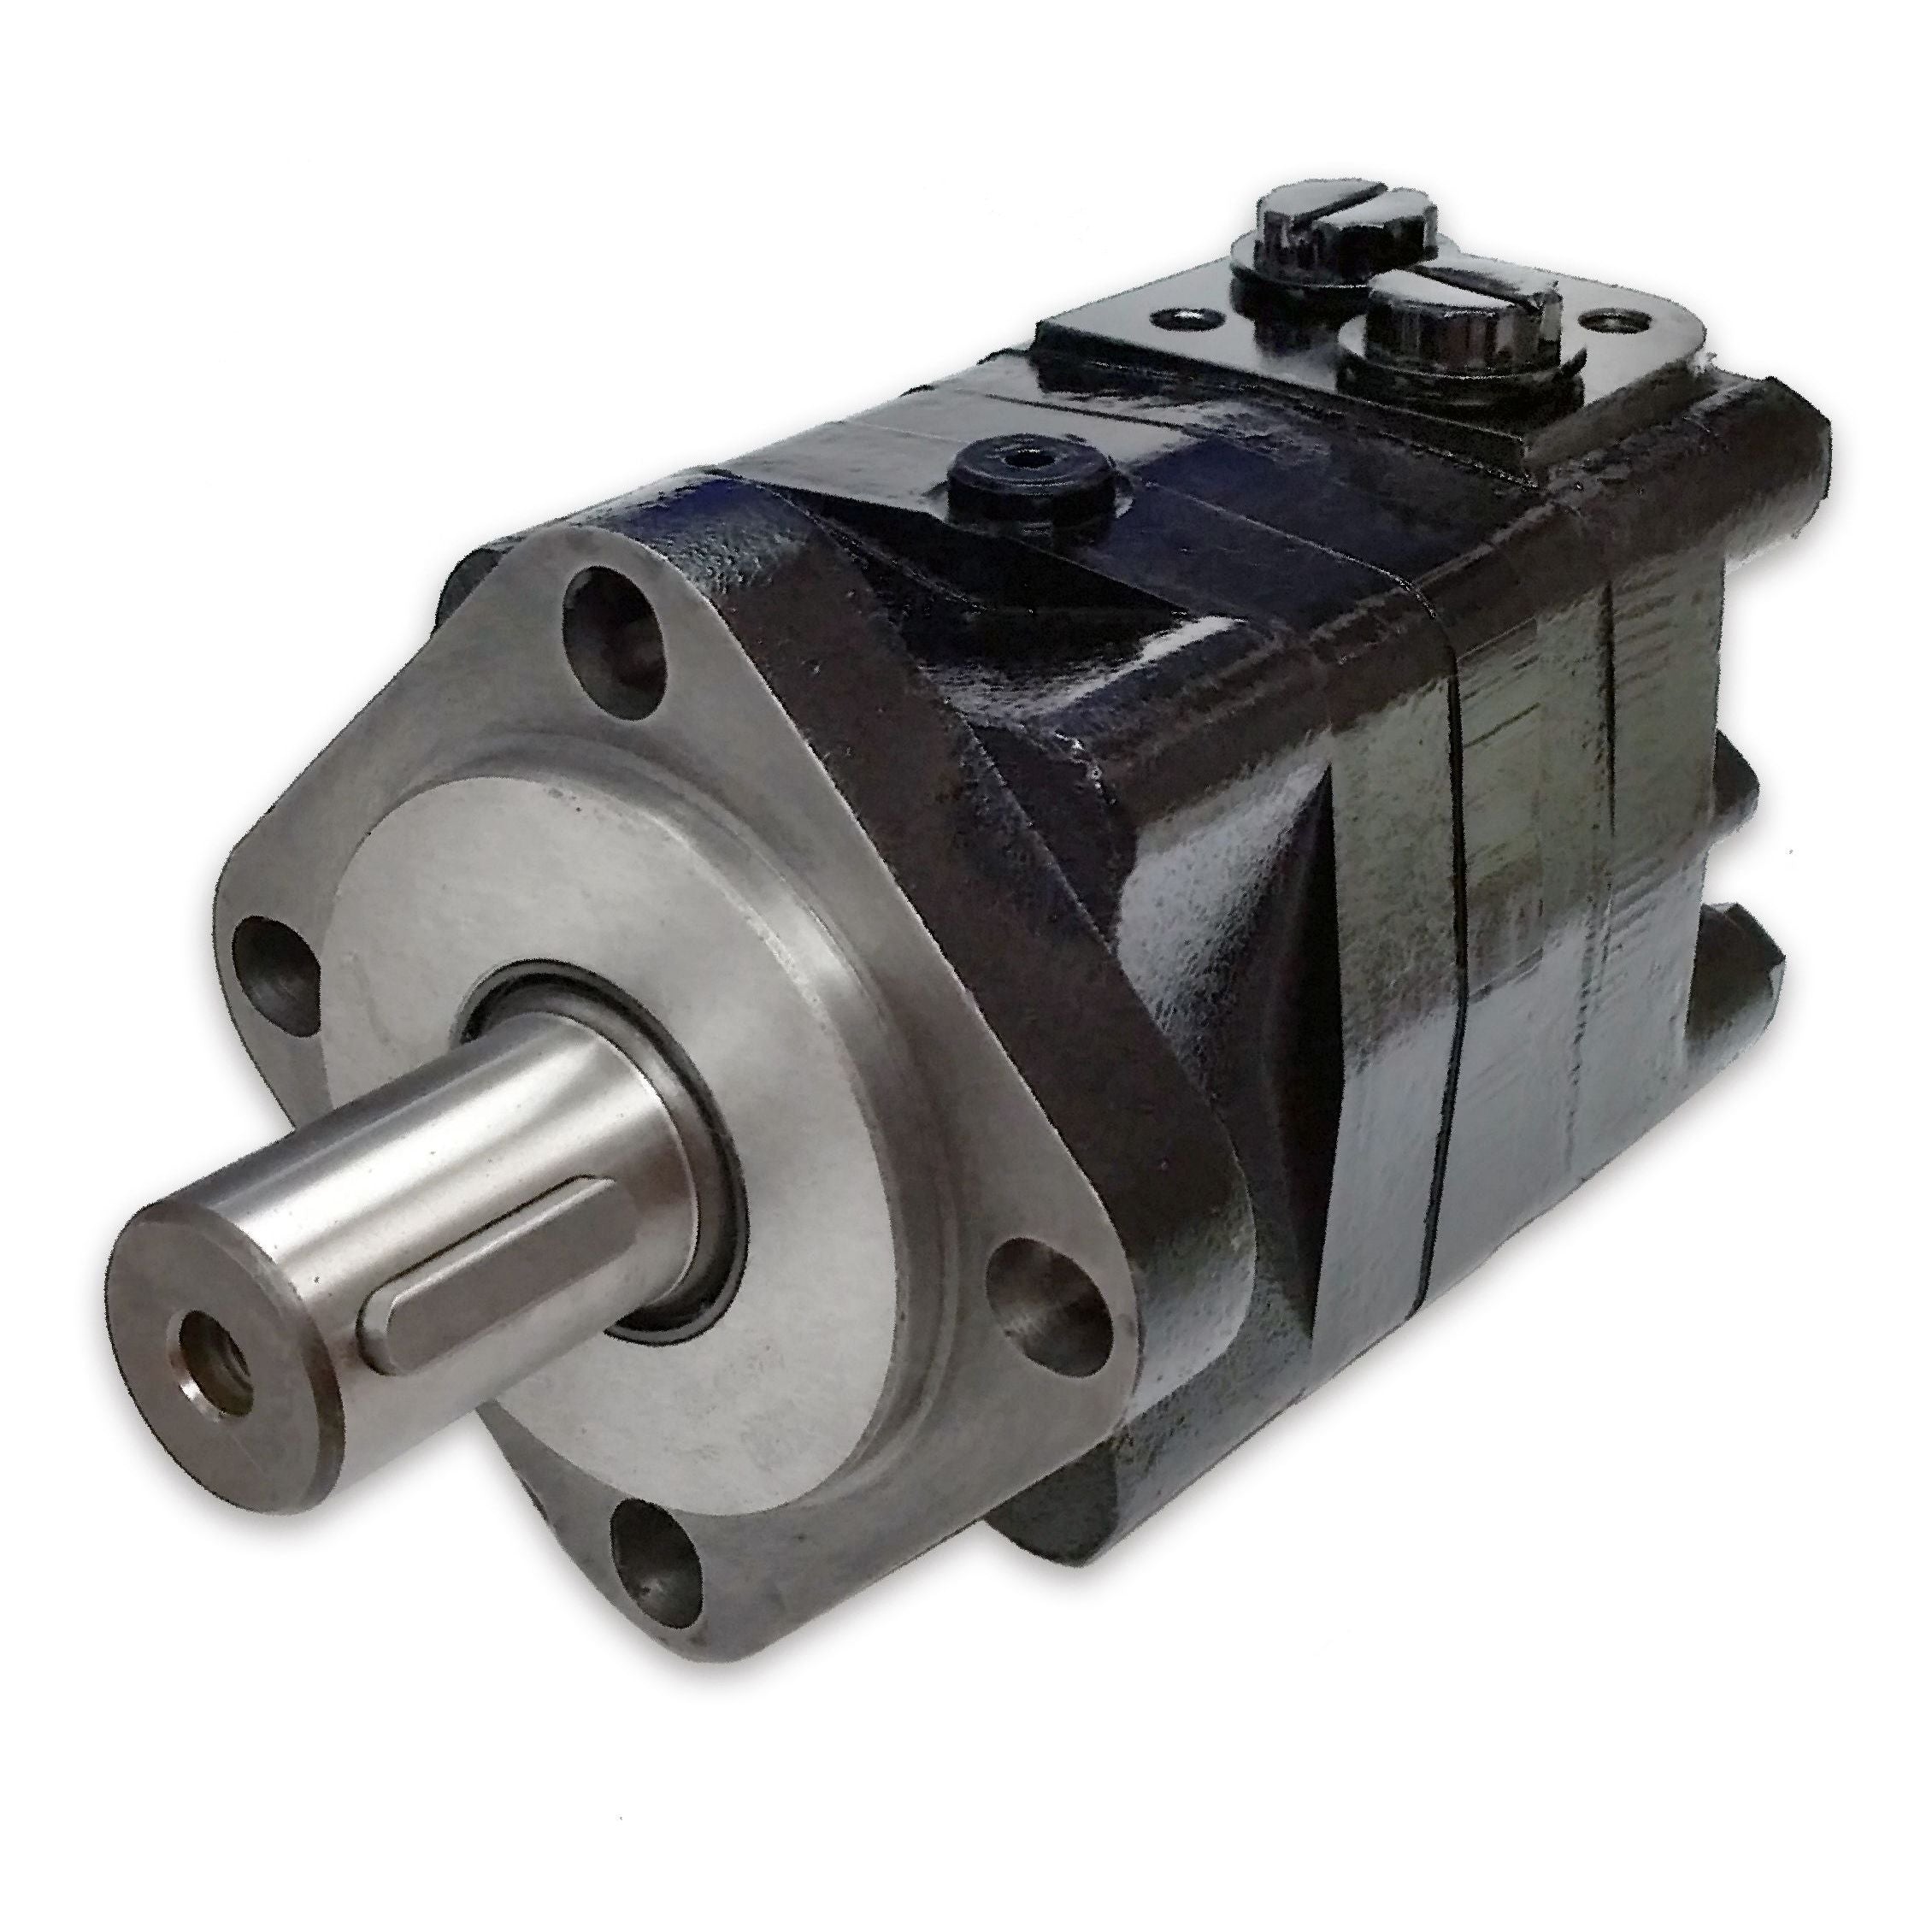 BMSY-475-E4-G-S : Dynamic LSHT Motor, 475cc, 155RPM, 8053in-lb, 2030psi Differential, 19.81GPM, SAE A 4-Bolt Mount, 1.25" Bore x 5/16" Key Shaft, Side Ported, #10 SAE (5/8")